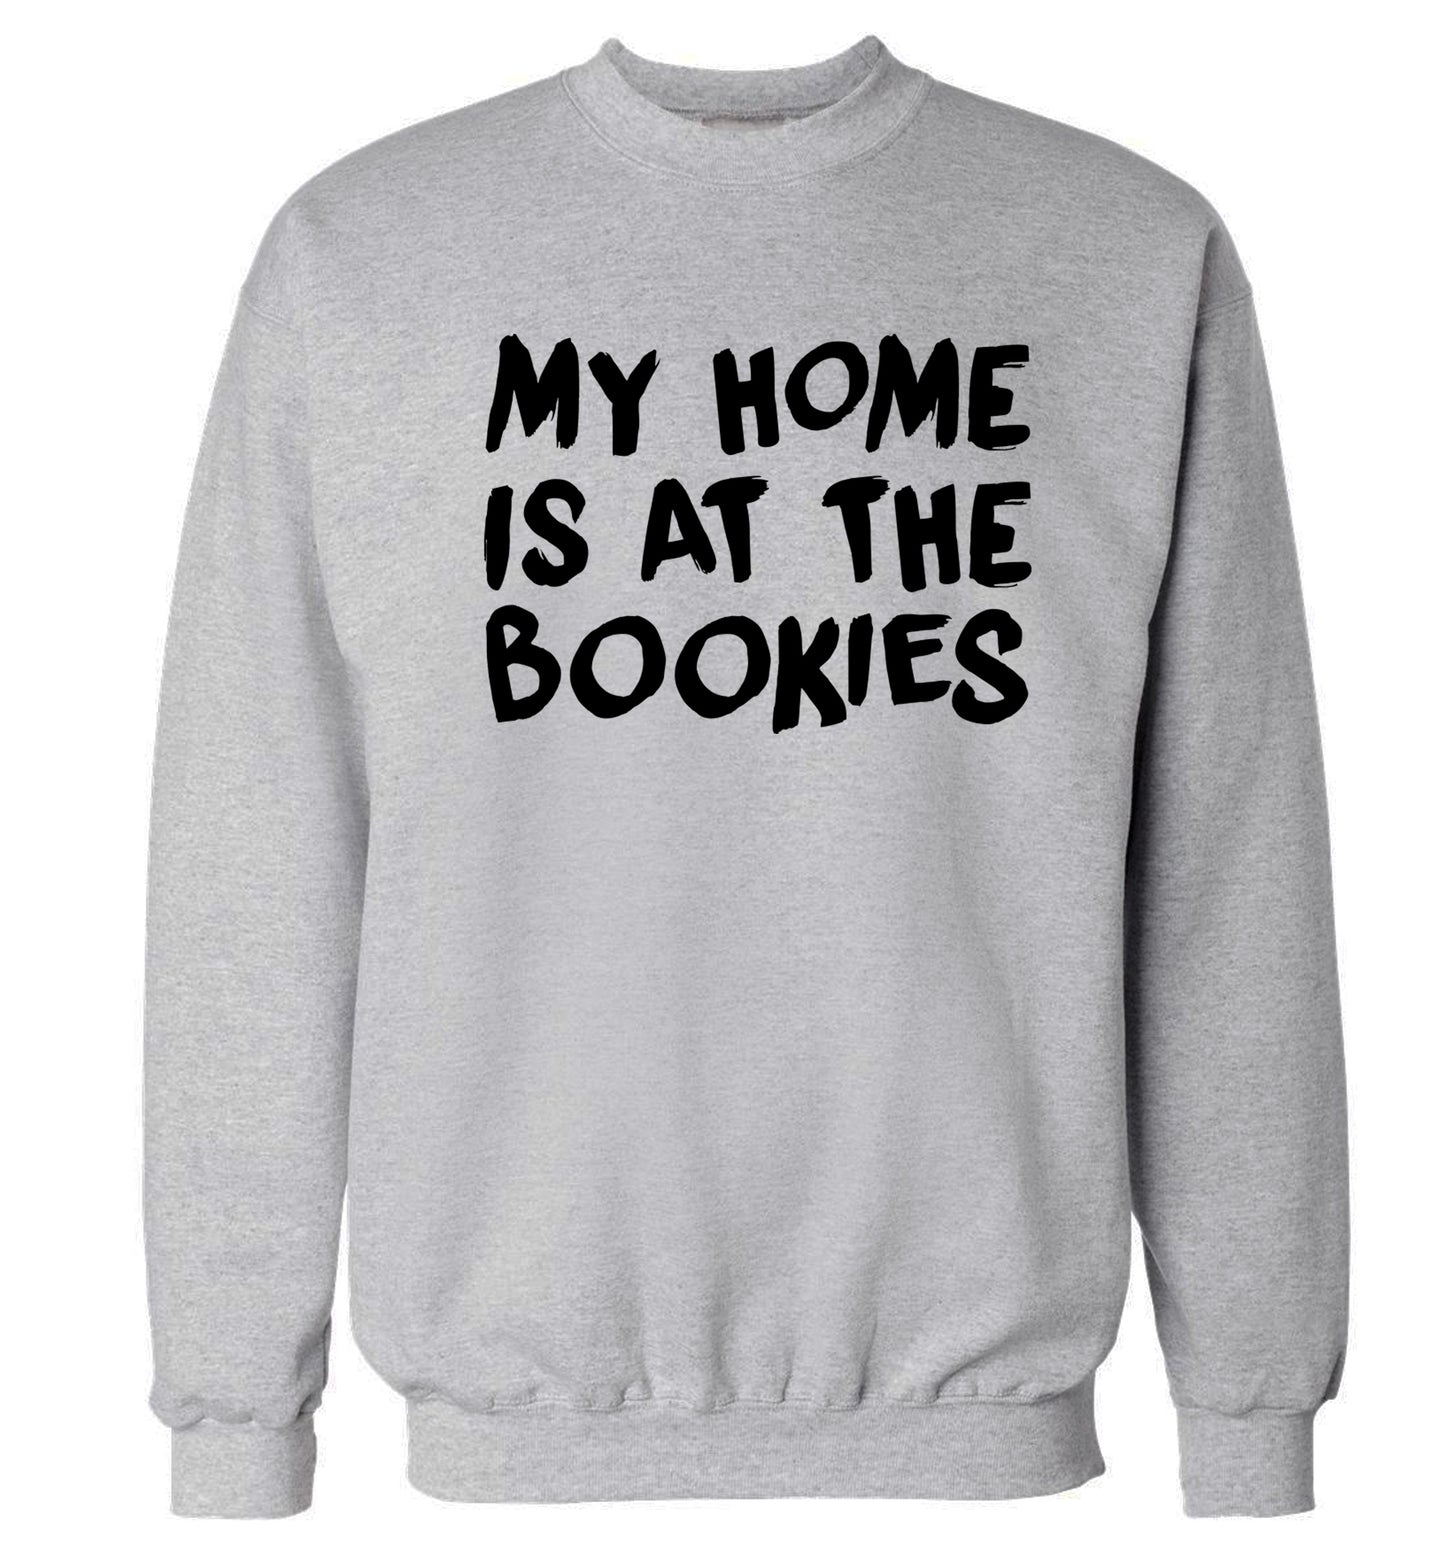 My home is at the bookies Adult's unisex grey Sweater 2XL